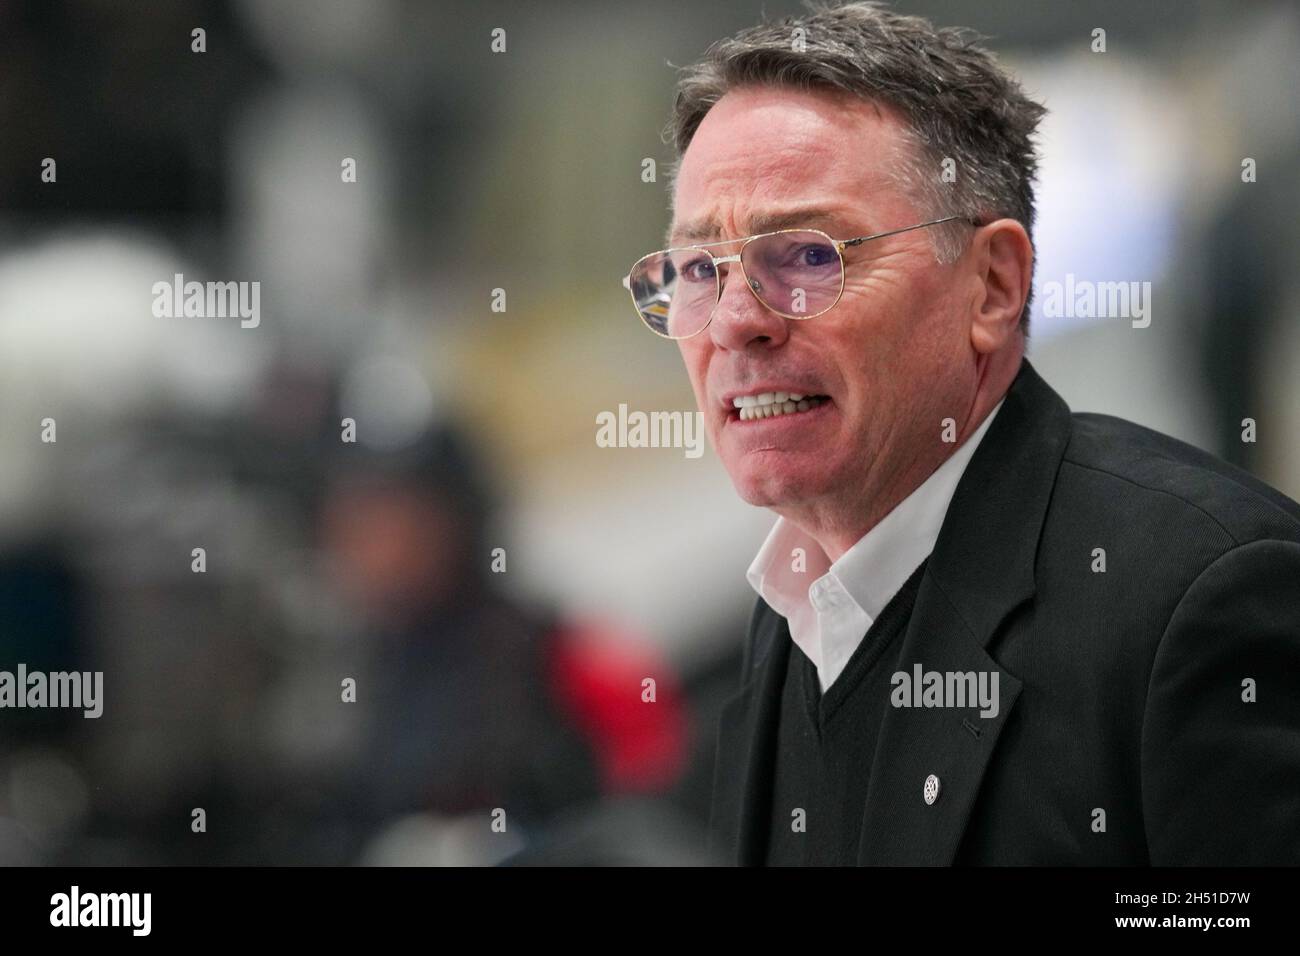 05.11.2021, Porza, Corner Arena, NL: HC Lugano - ZSC Lions, headcoach Chris McSorley (Lugano) during the game (Photo by Jari Pestelacci/Just Pictures/Sipa USA) Stock Photo